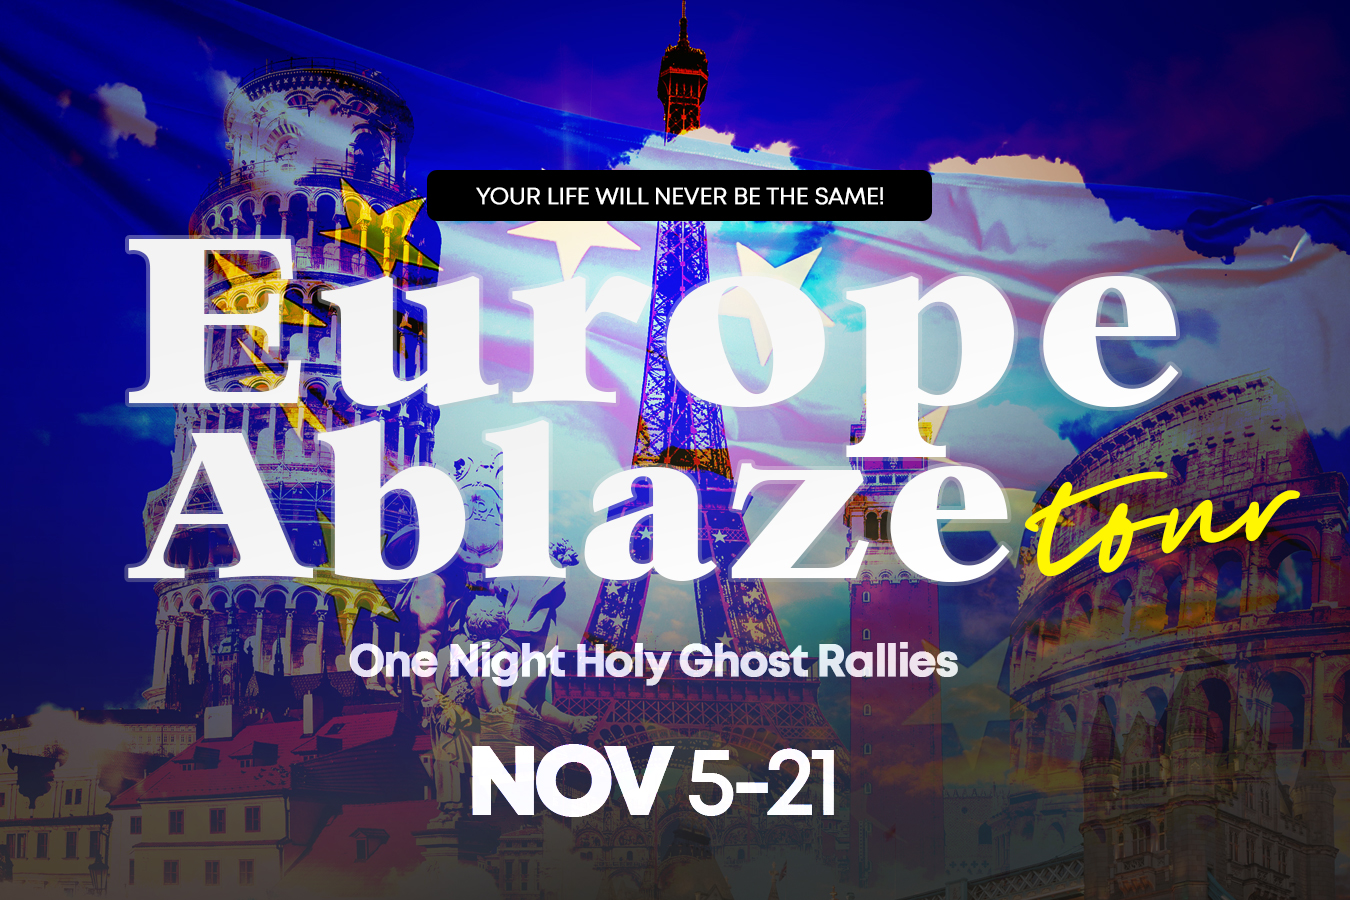 Final Report from Europe Ablaze Tour